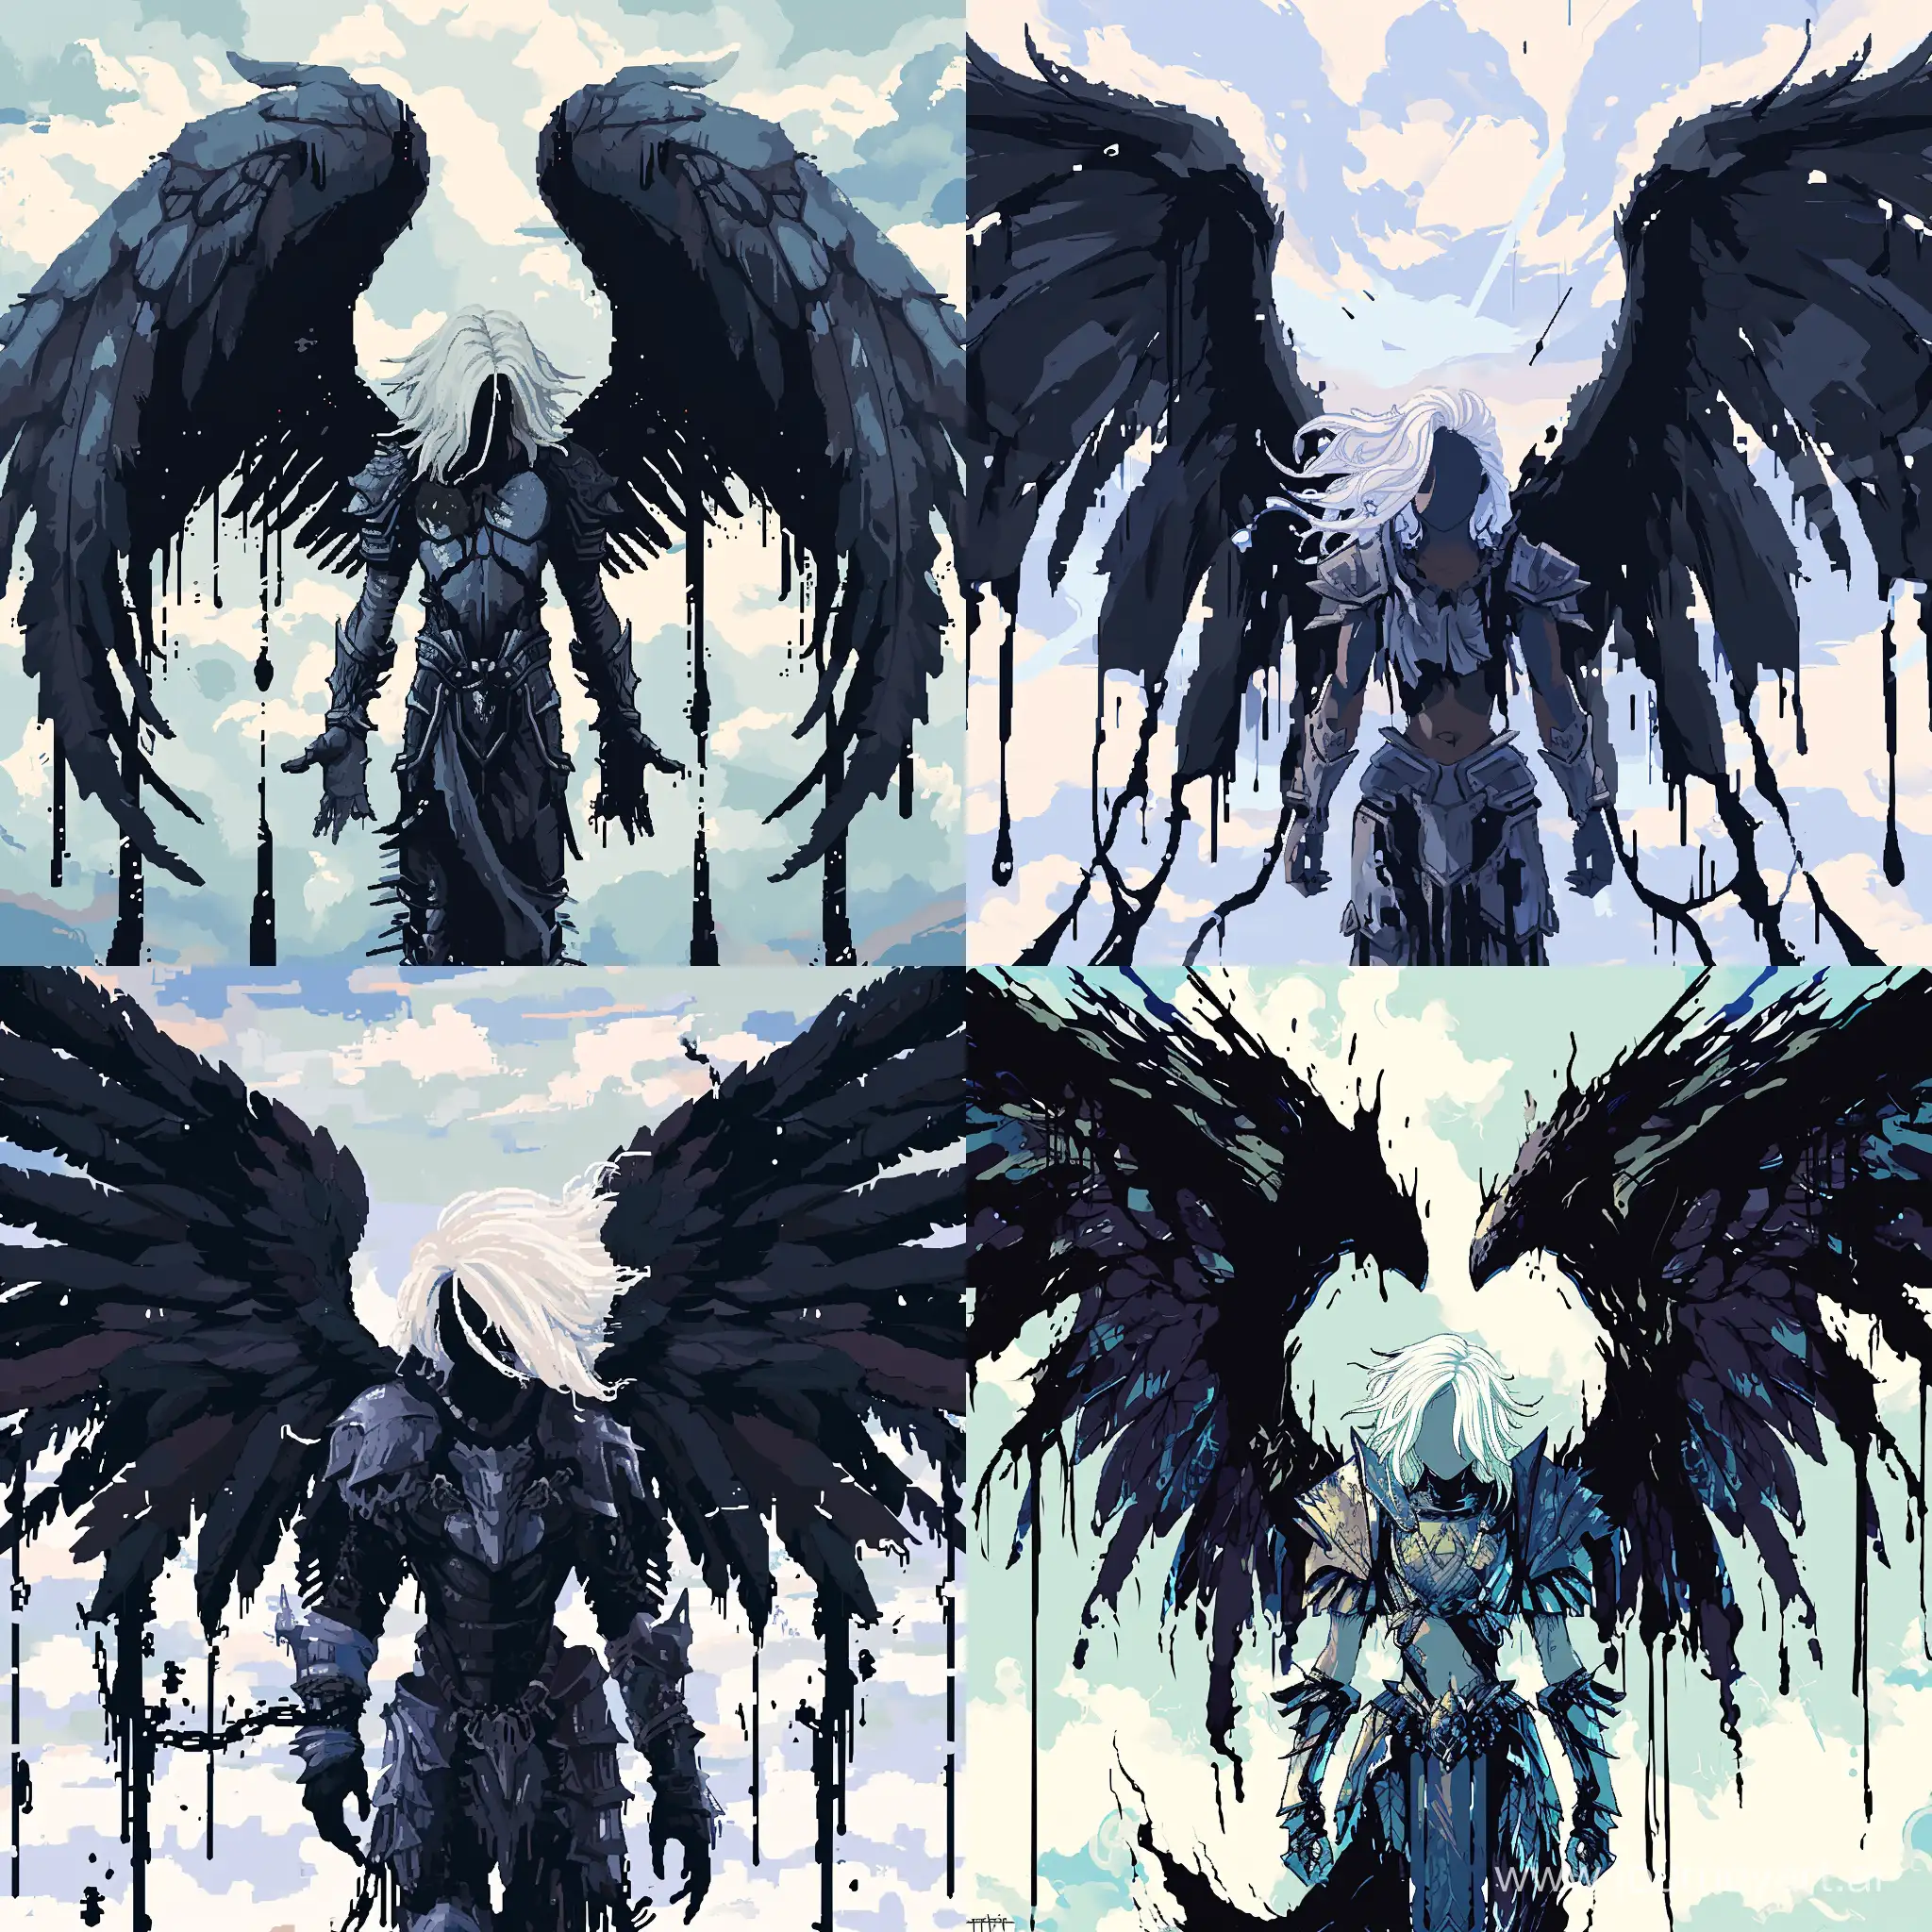 128 bit pixel art, dark angel with large black wings, standing in front of a sky background with white and blue hues, the angel has white hair and is wearing a armor-like outfit, the wings are spread out and there are black paint drips trailing from them